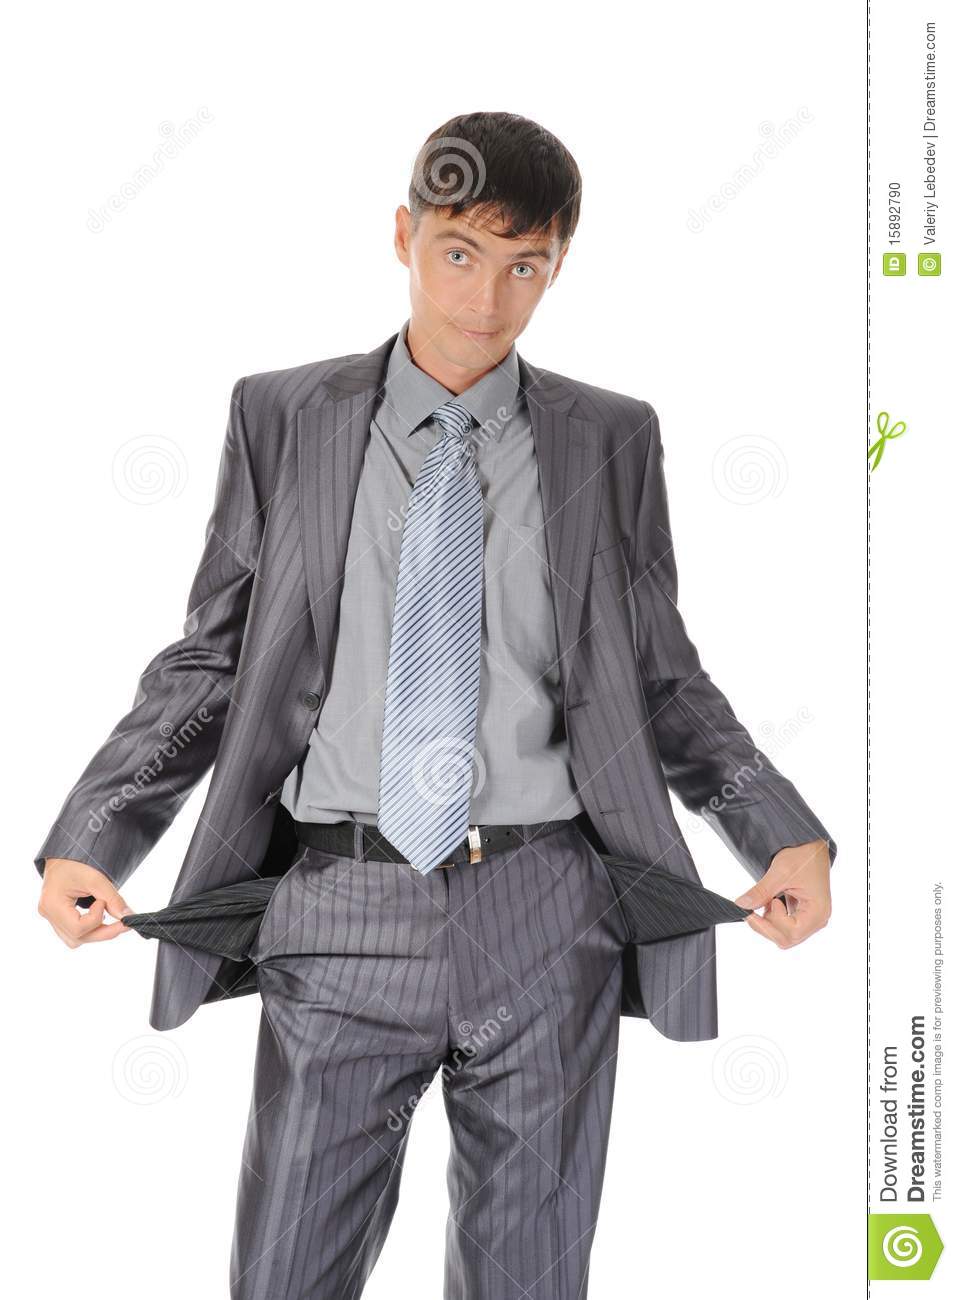 More Similar Stock Images Of   Man With Empty Pockets  